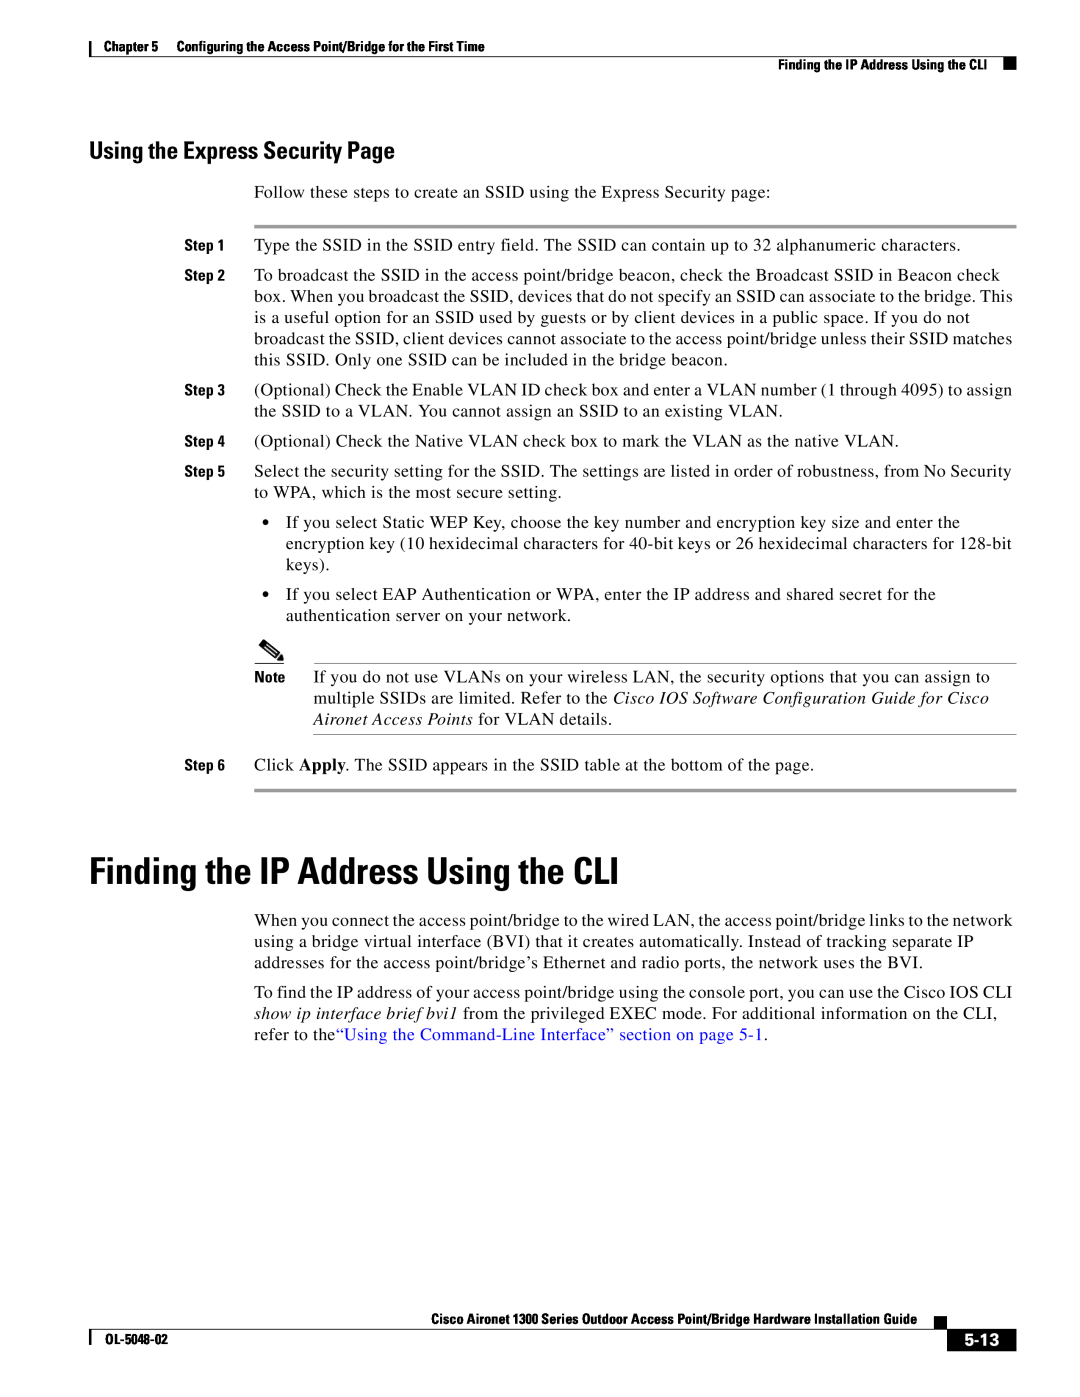 Cisco Systems 1300 Series manual Finding the IP Address Using the CLI, Using the Express Security Page, 5-13 